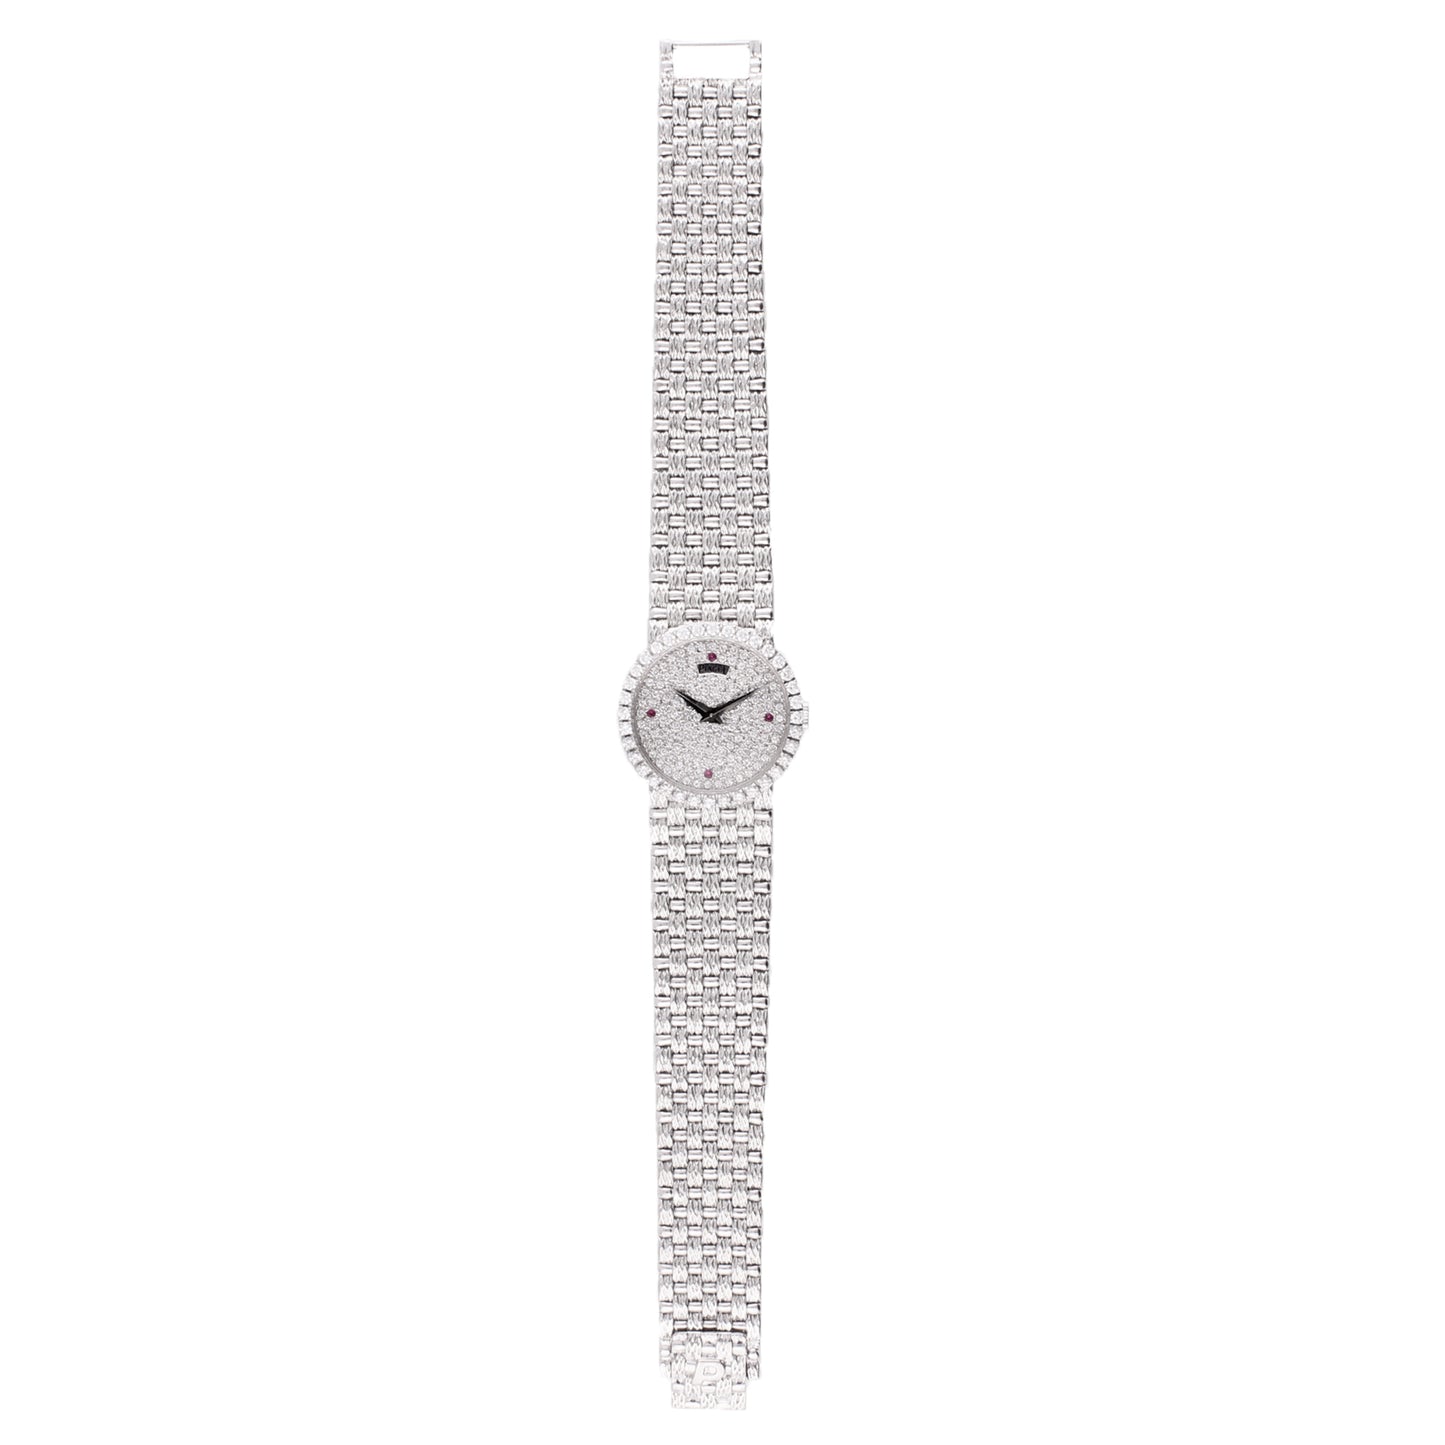 18ct white gold and diamond set Piaget, reference 9706 bracelet watch. Made 1970's